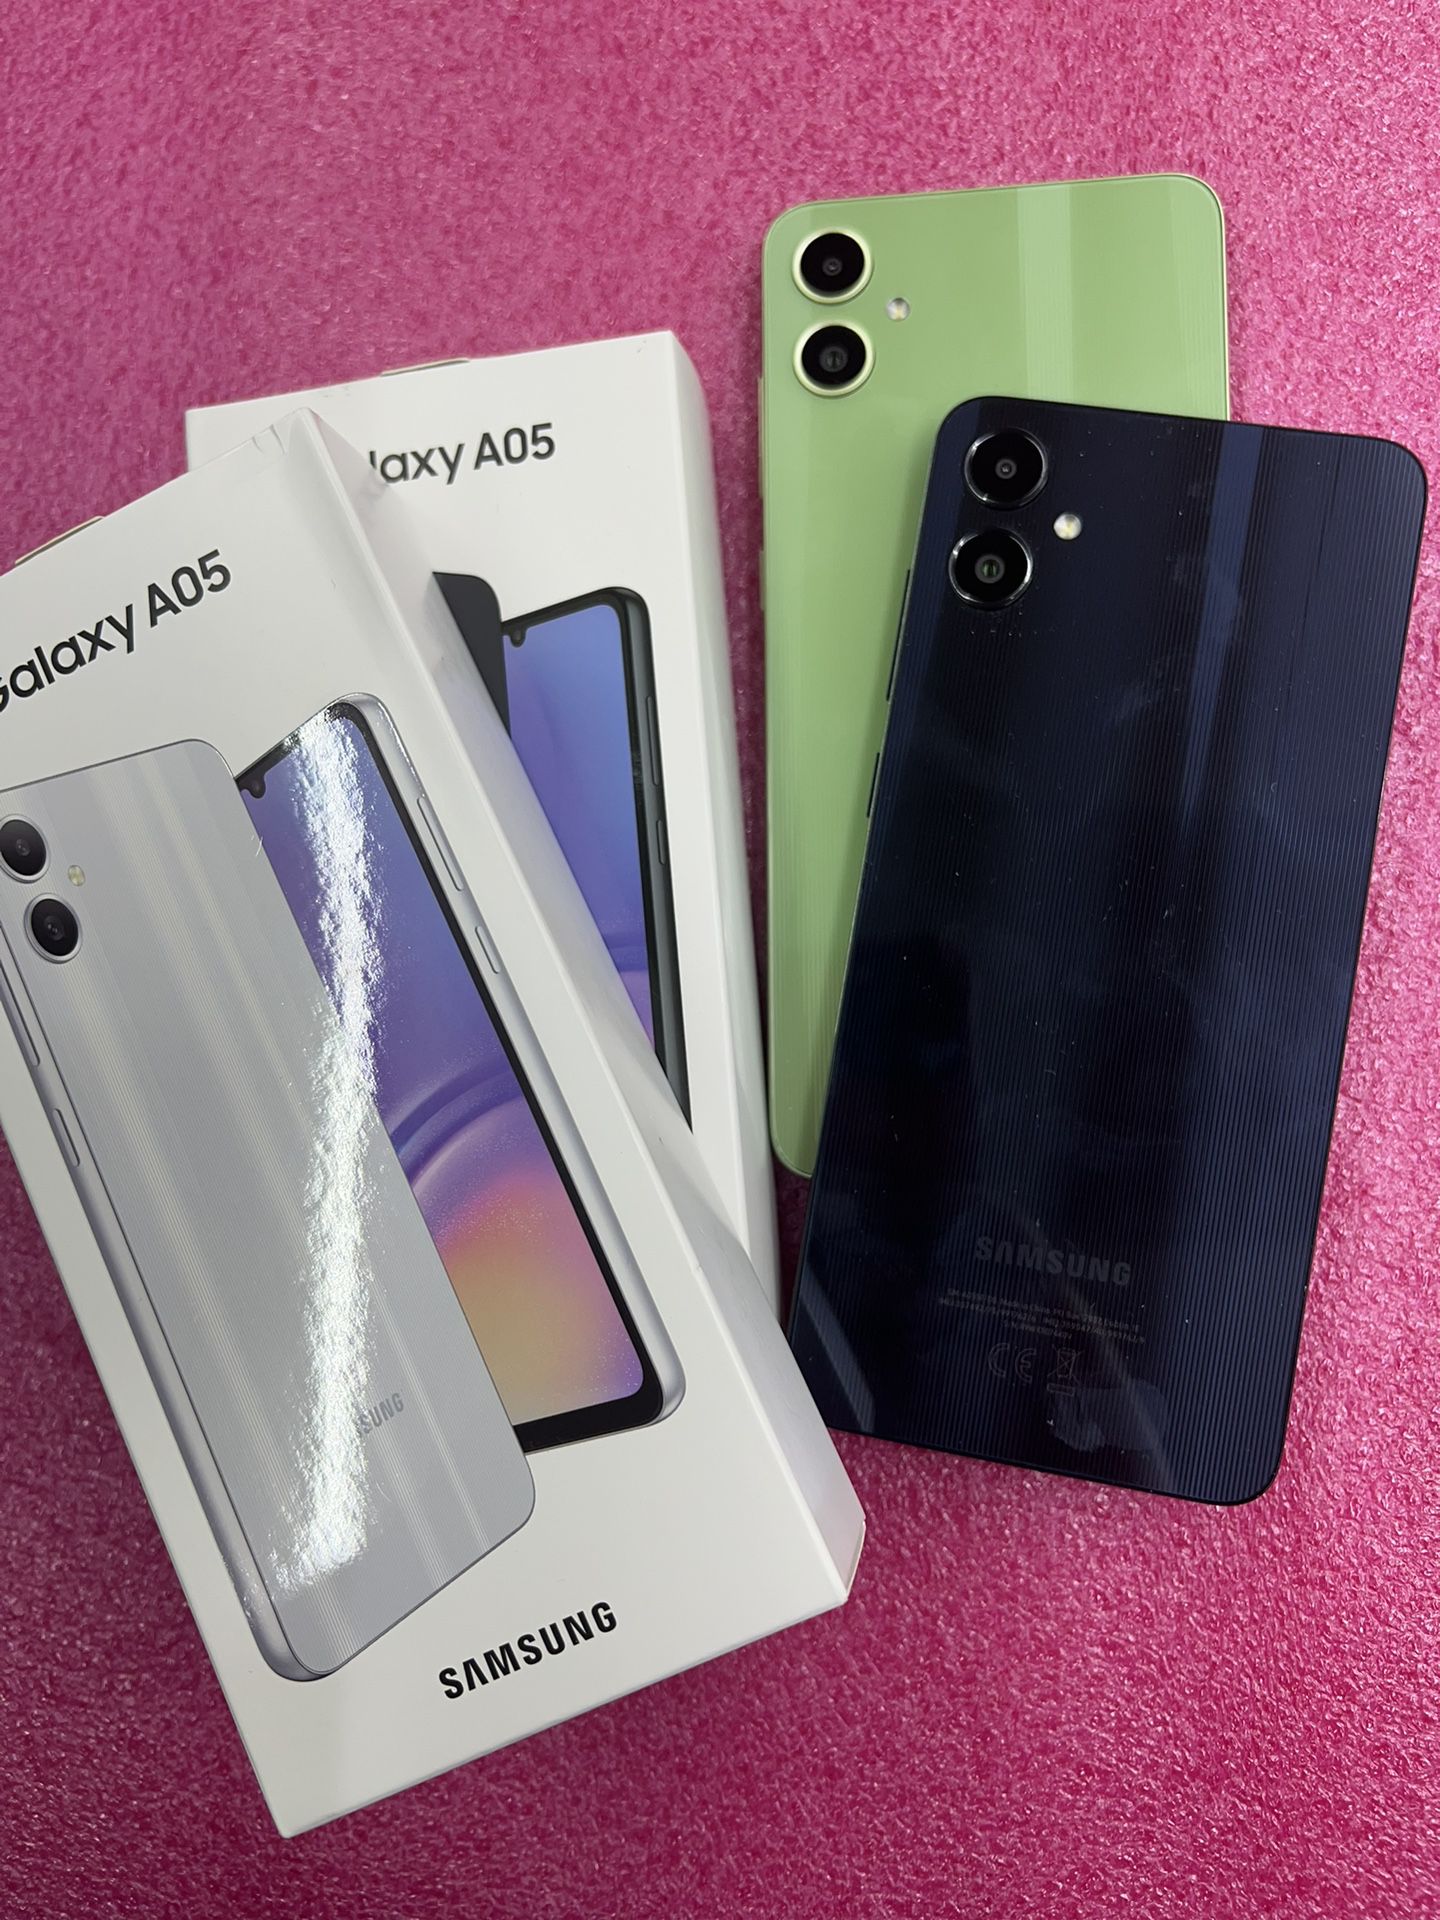 Bran New In box Unlocked Samsung Galaxy A15 / 128Gb with all Original Accessories on sale now! Comes with warranty! Many colors available Welcome 